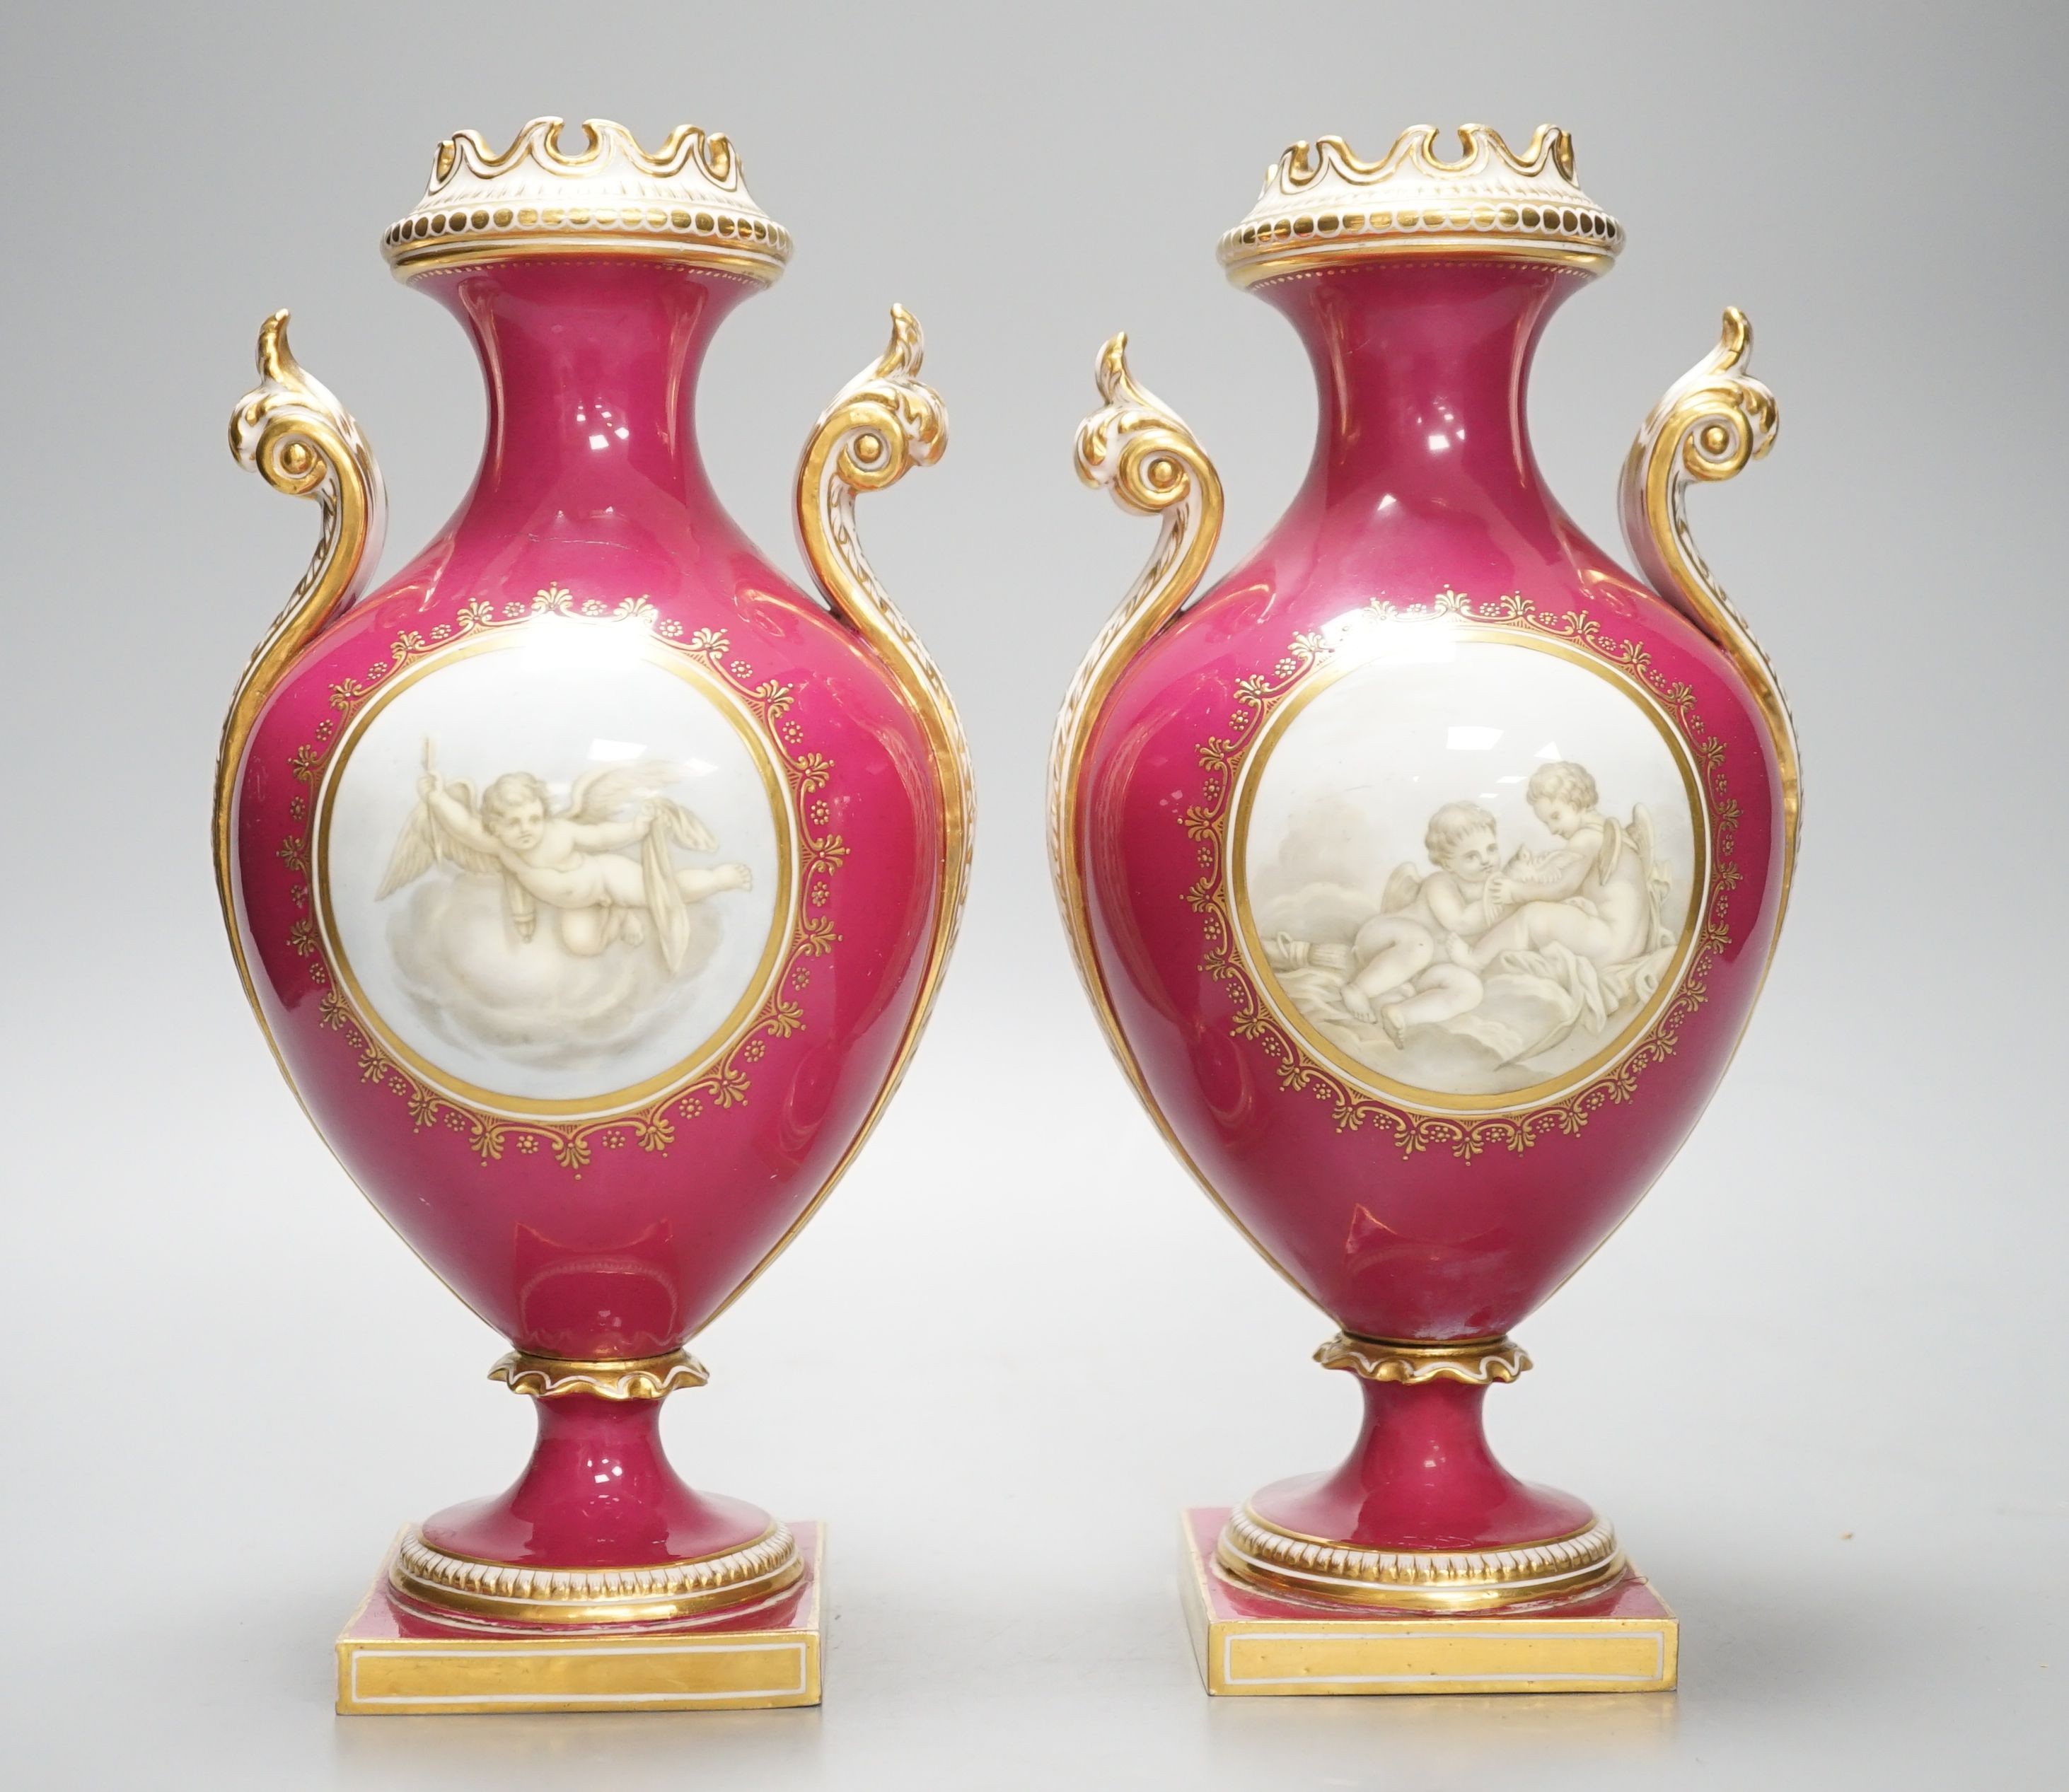 A pair of Coalport vases painted en-grisaille with cherubs in Chelsea style on a crimson ground, CSN mark in gold to one, height 23.5cm